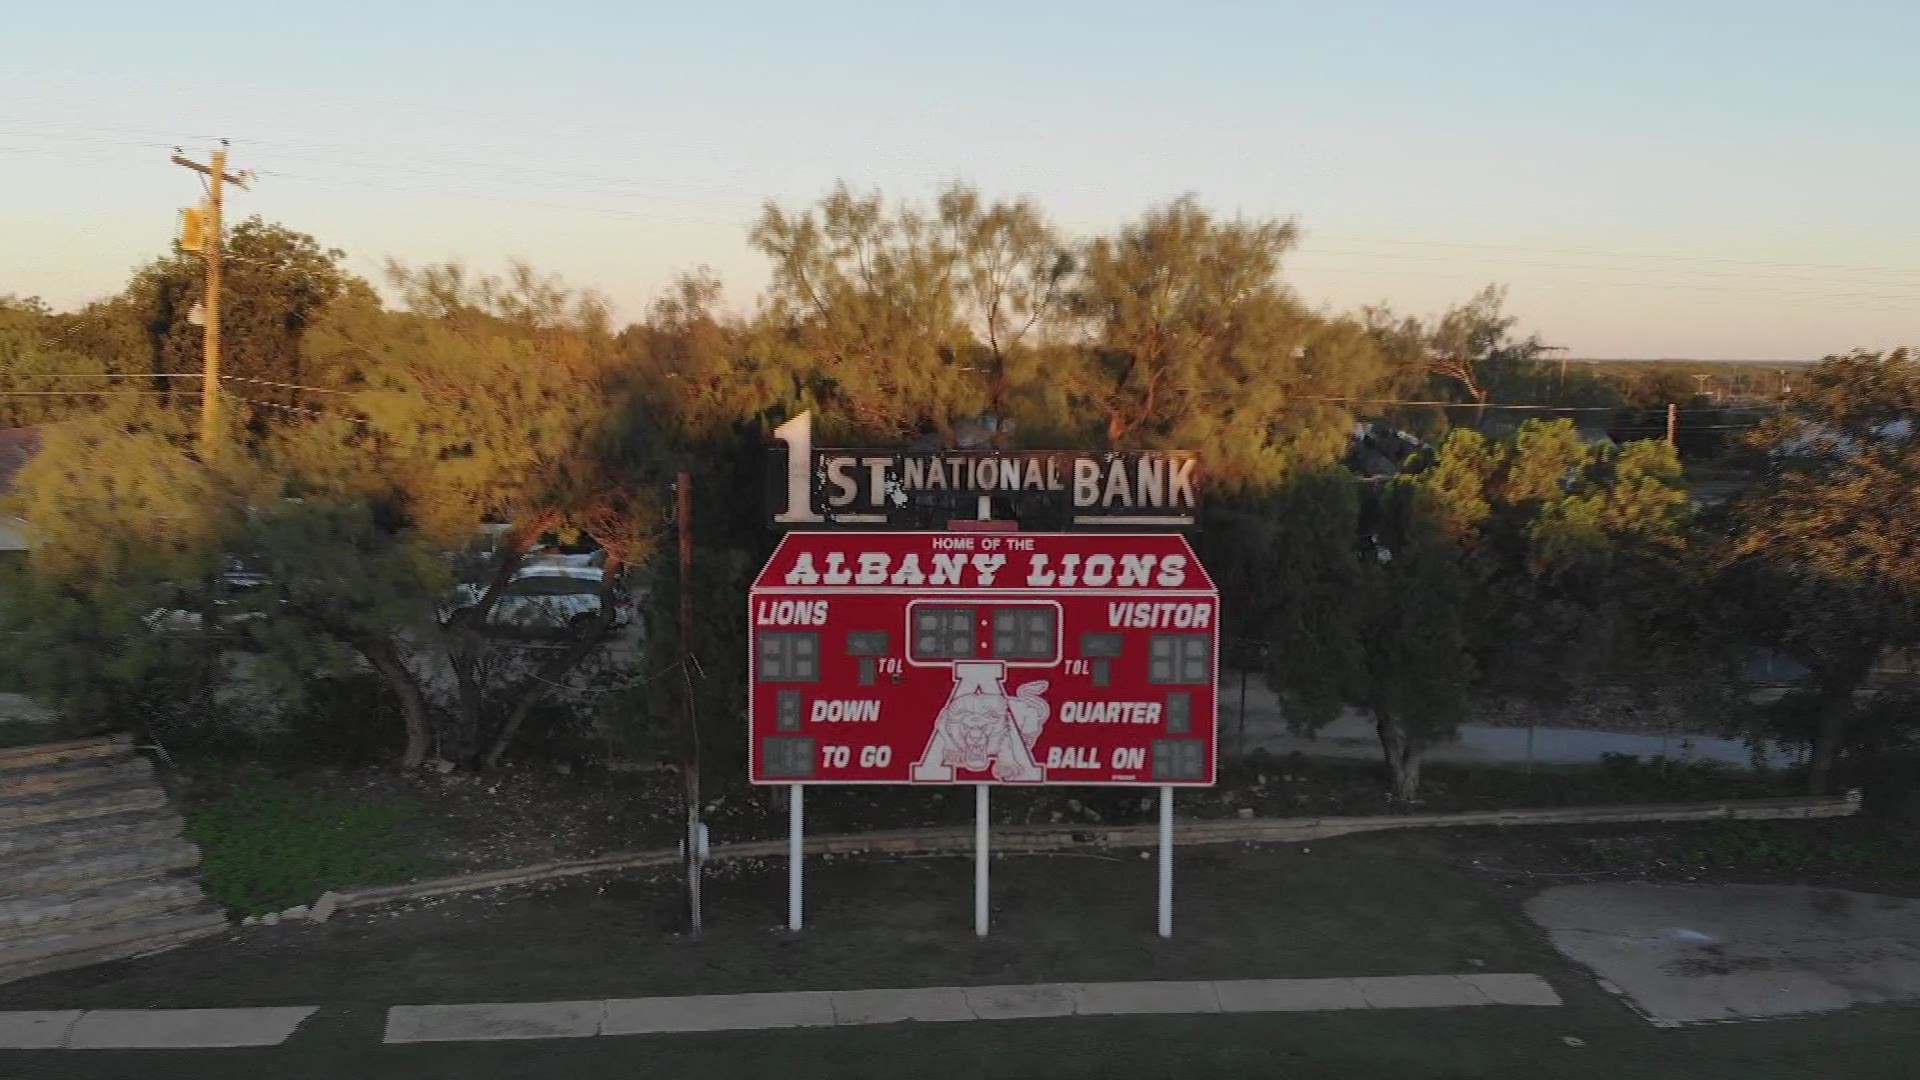 In a town like Albany, the football team has made a huge impact. Before the Lions take the field for their State Semifinal football game, the community wanted to show how proud they are of their team.